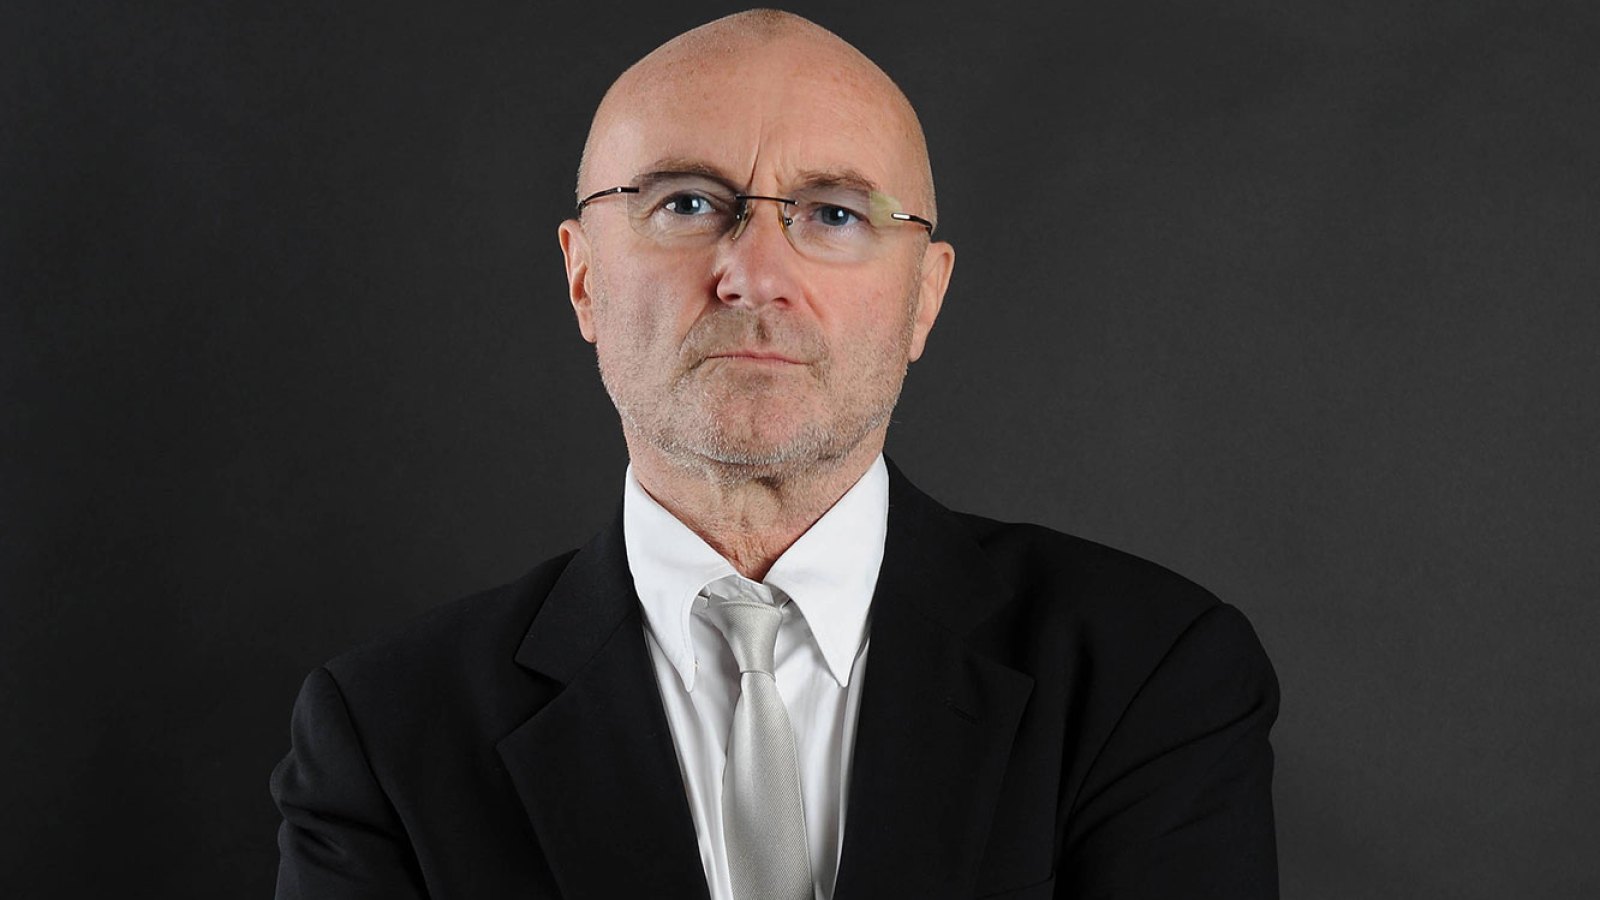 Phil Collins Retiring From Music Due to Ill Health